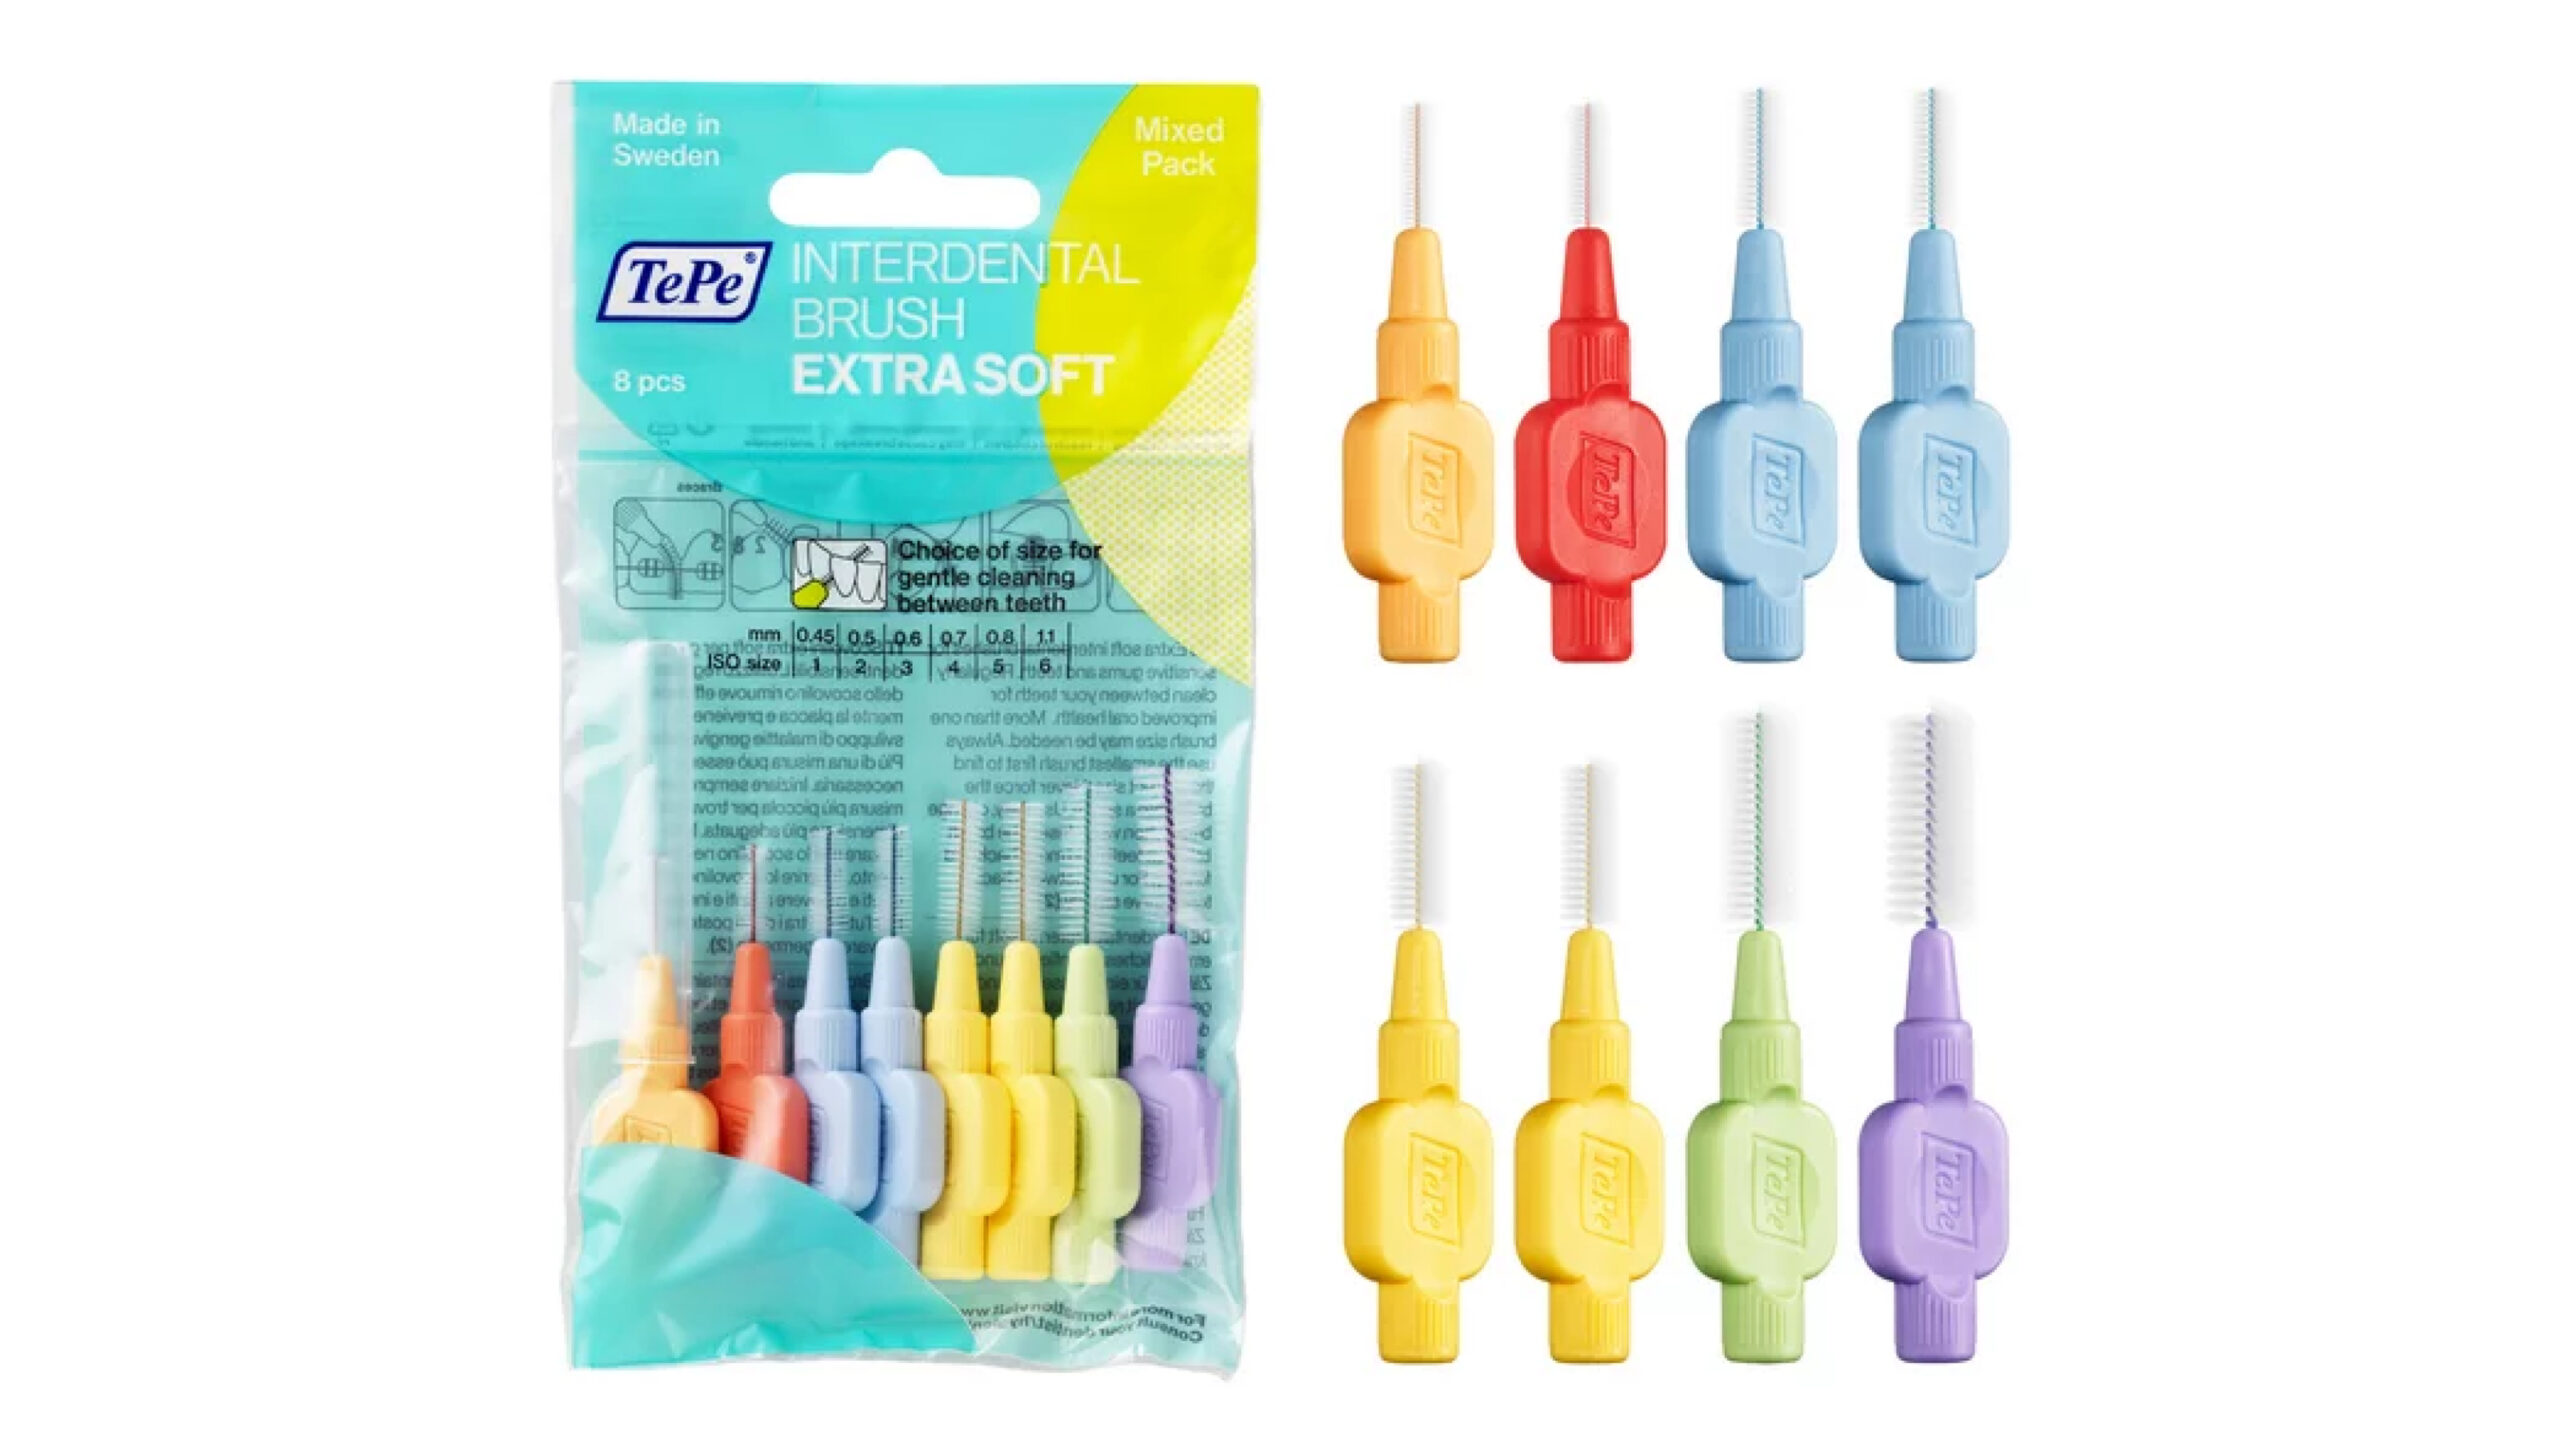 TePe interdental brush extra soft packet and some samples